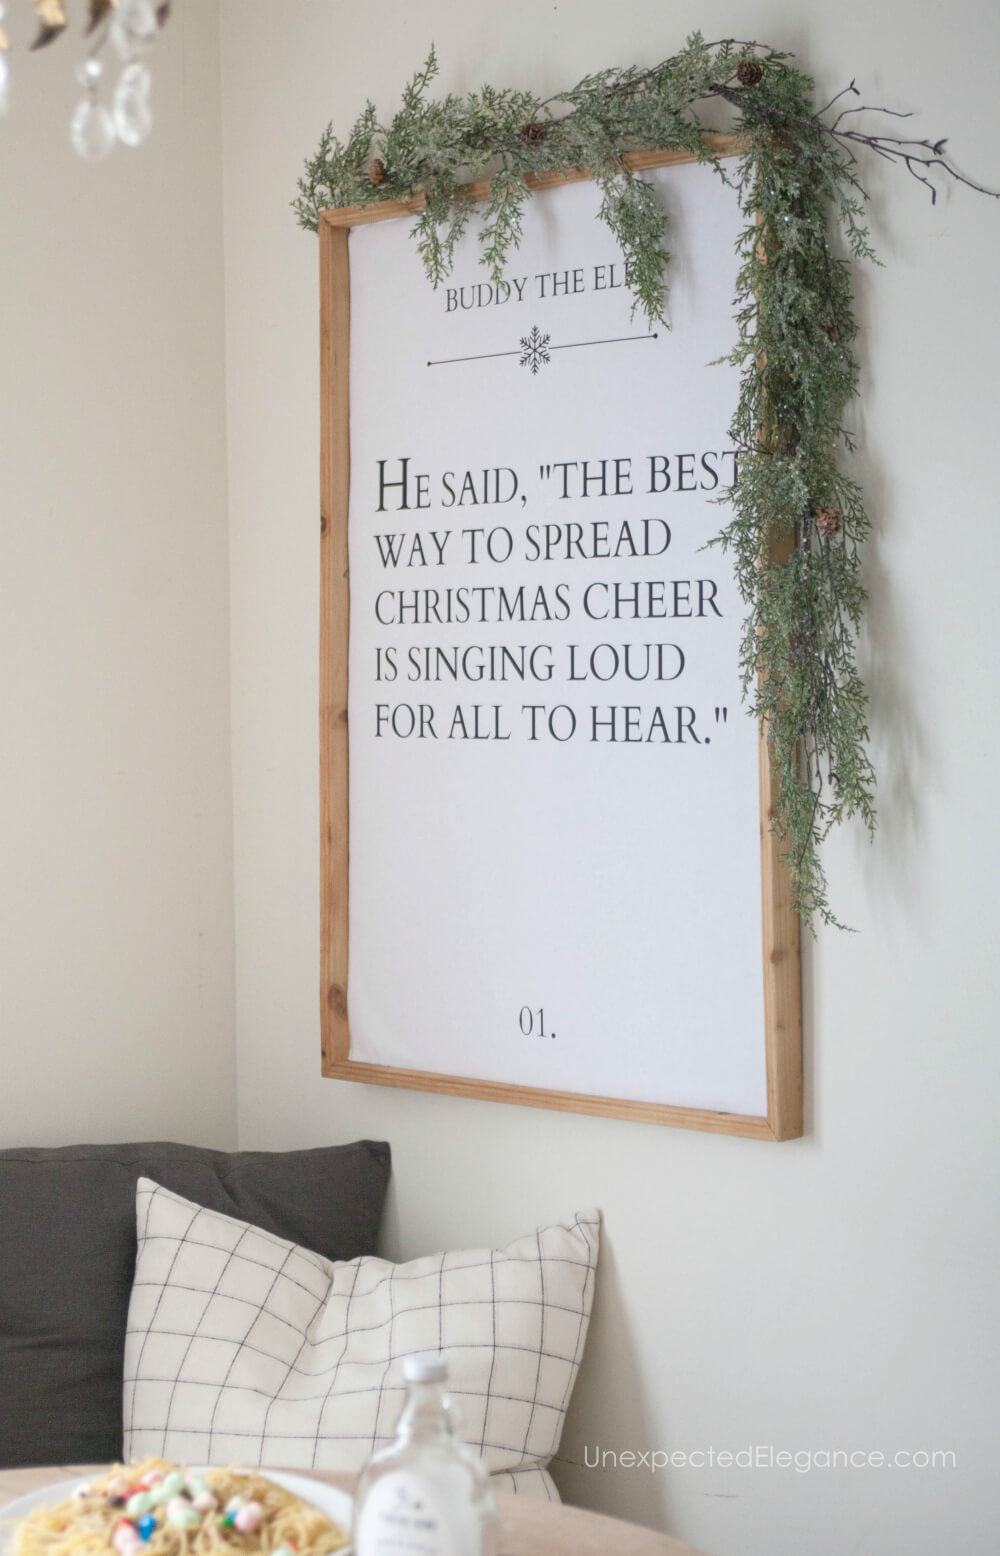 Get this fun ELF Movie quote printable to add to your holiday decor! There's also a tutorial for creating easy DIY customizable artwork. #freeprintable #christmasprintable